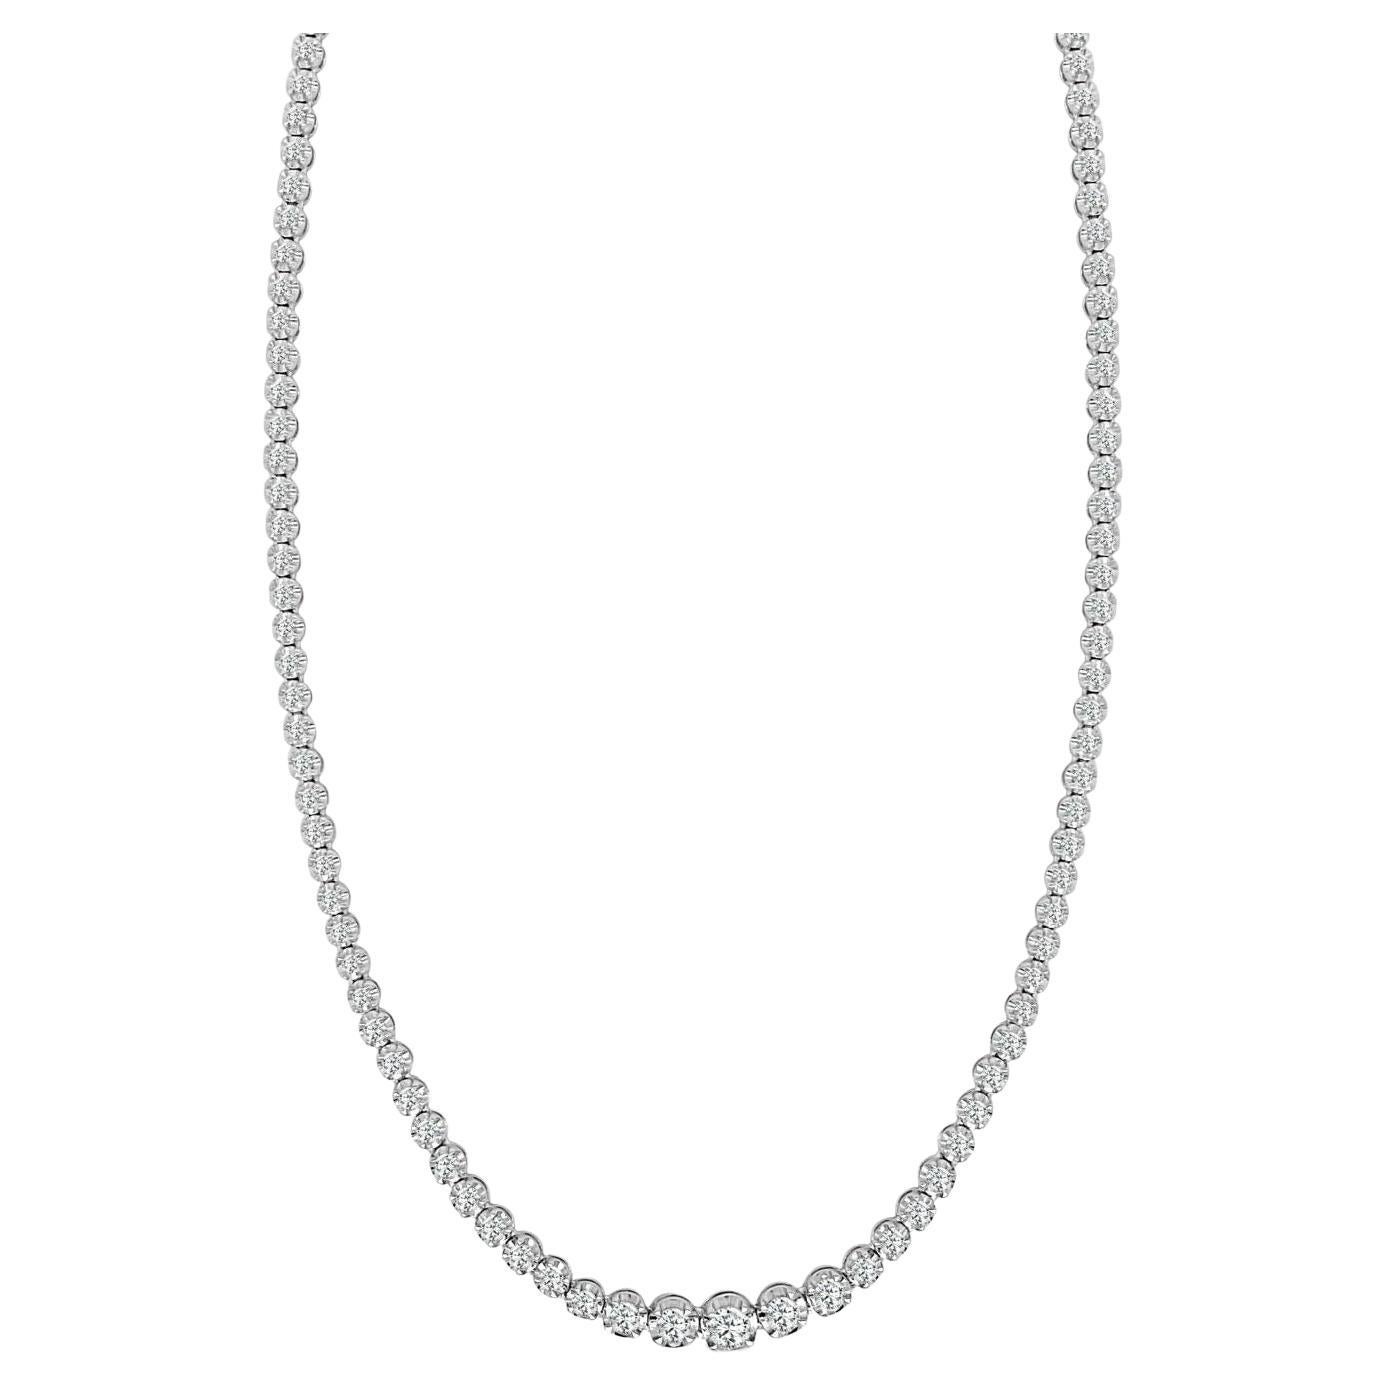 Tennis Necklace with 18k White Gold & Diamond